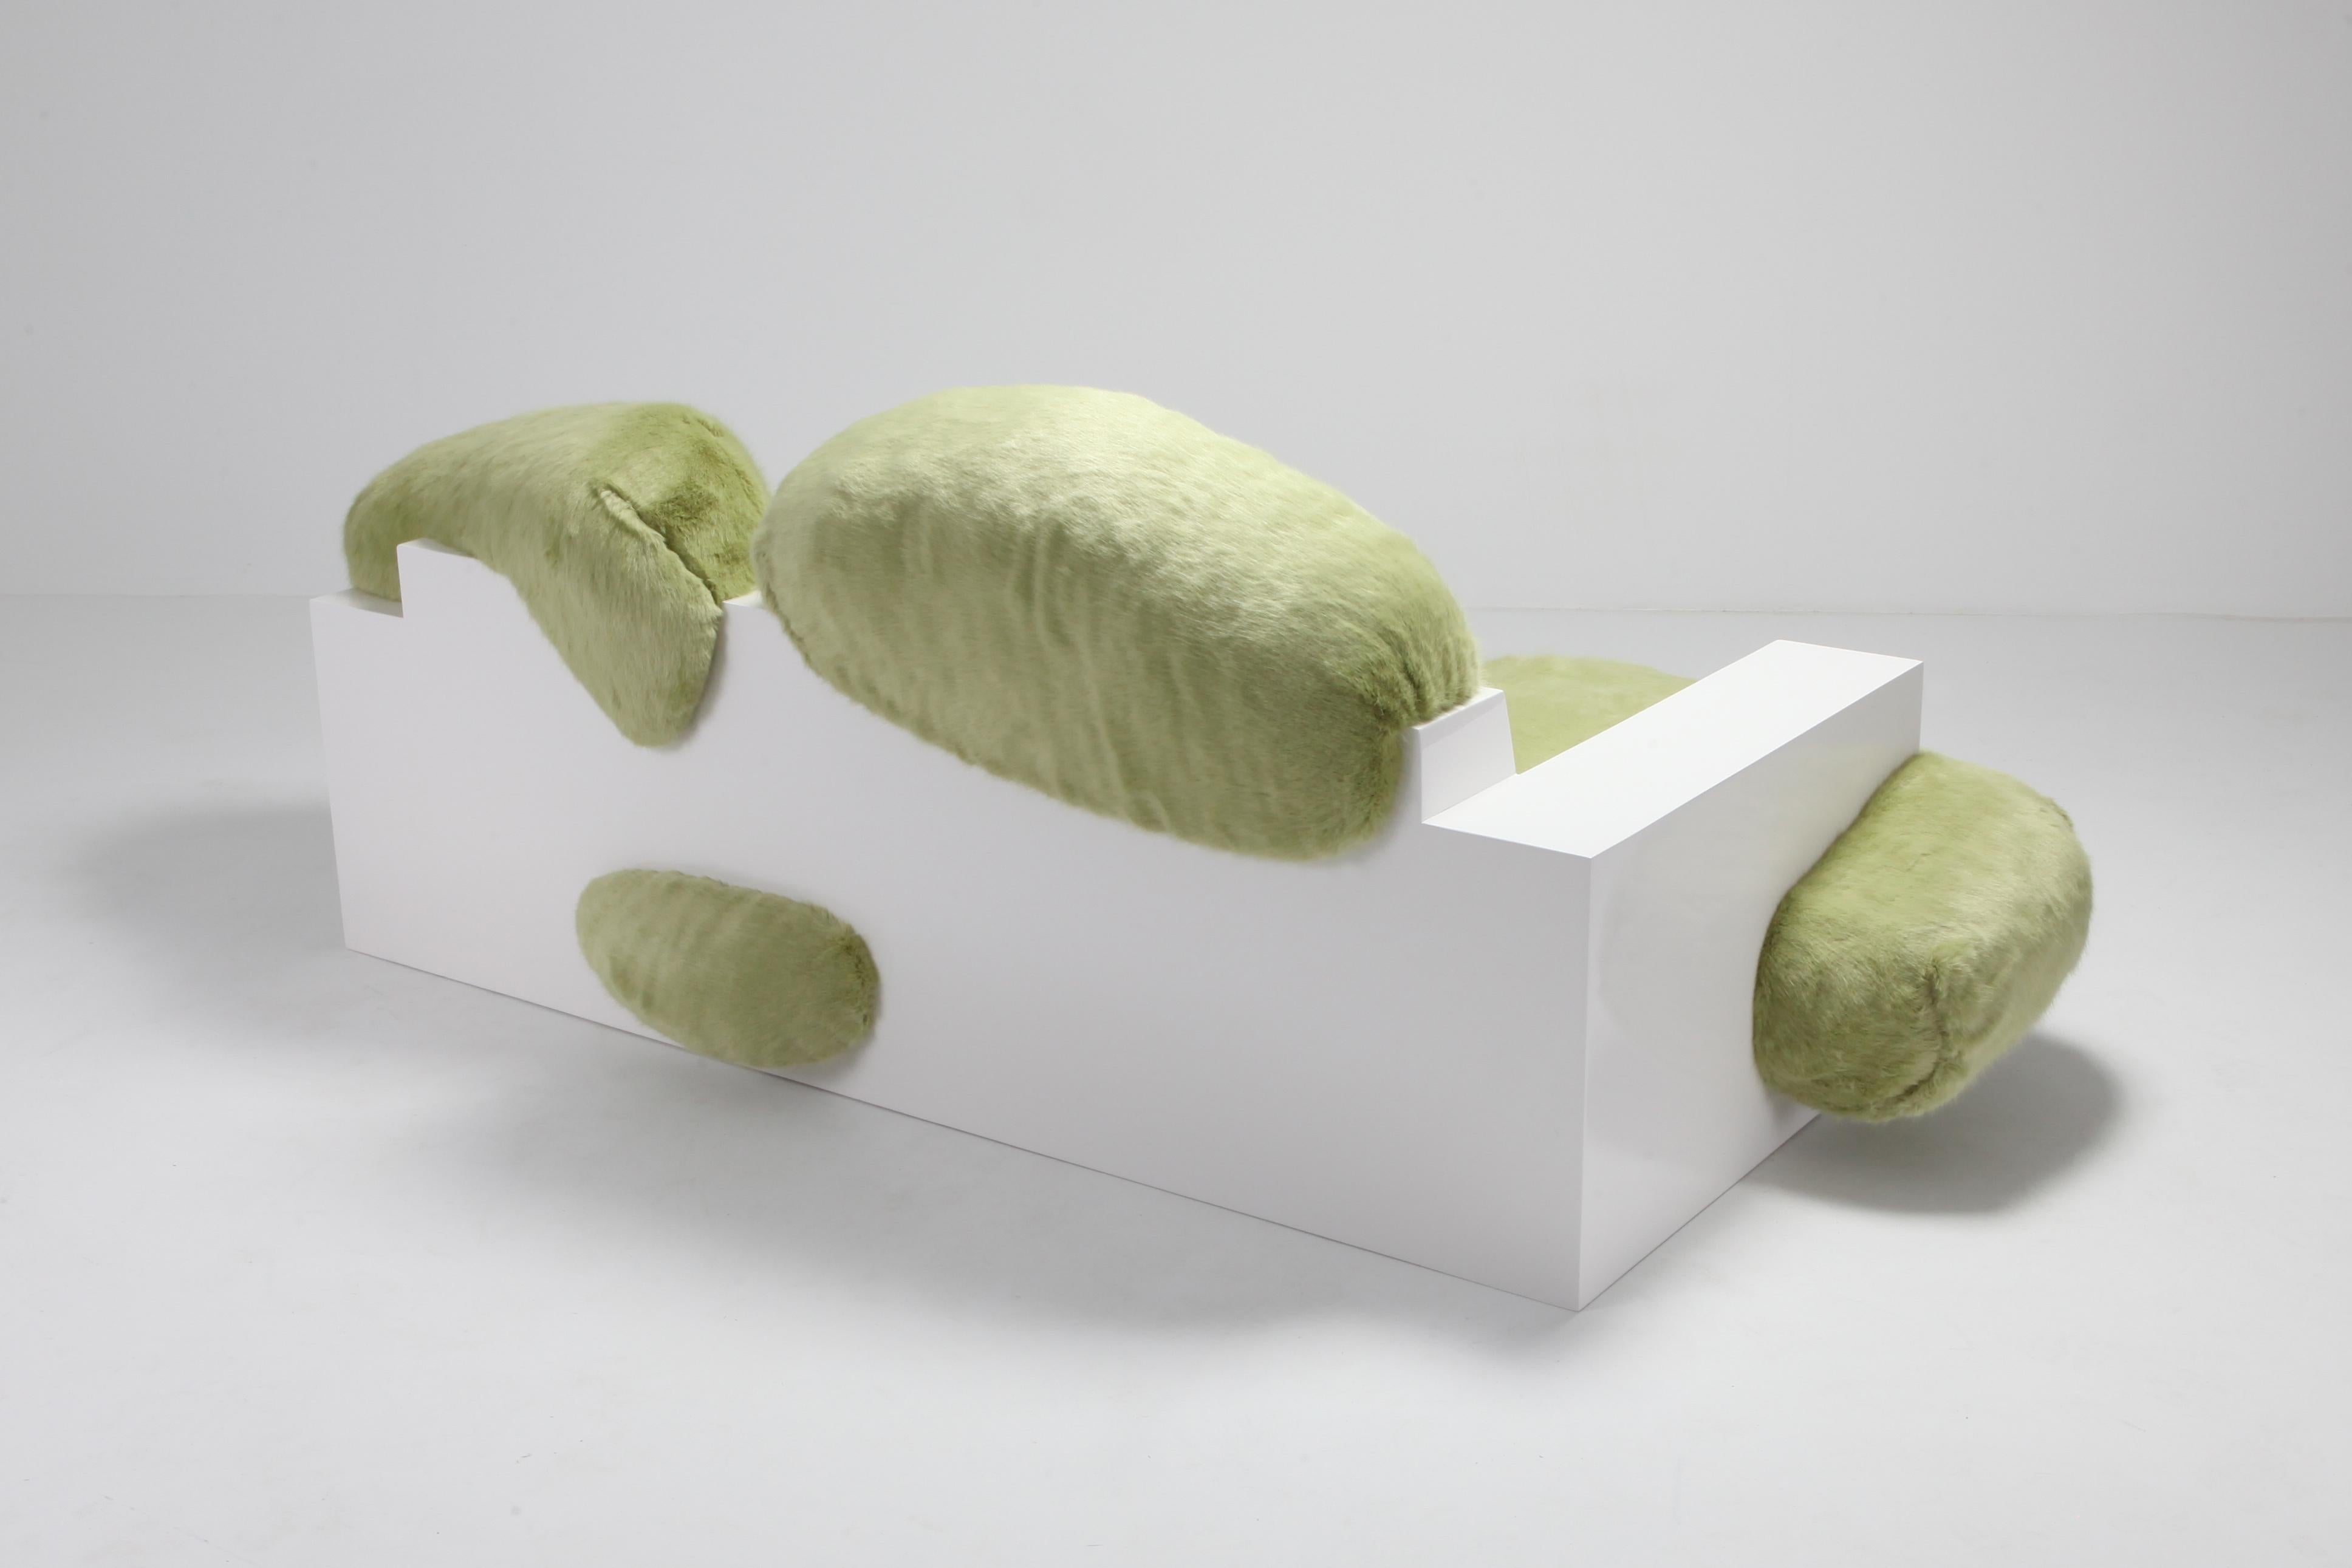 Post-Modern Pillow Couch by Schimmel & Schweikle from the Pillow.pillow Collection